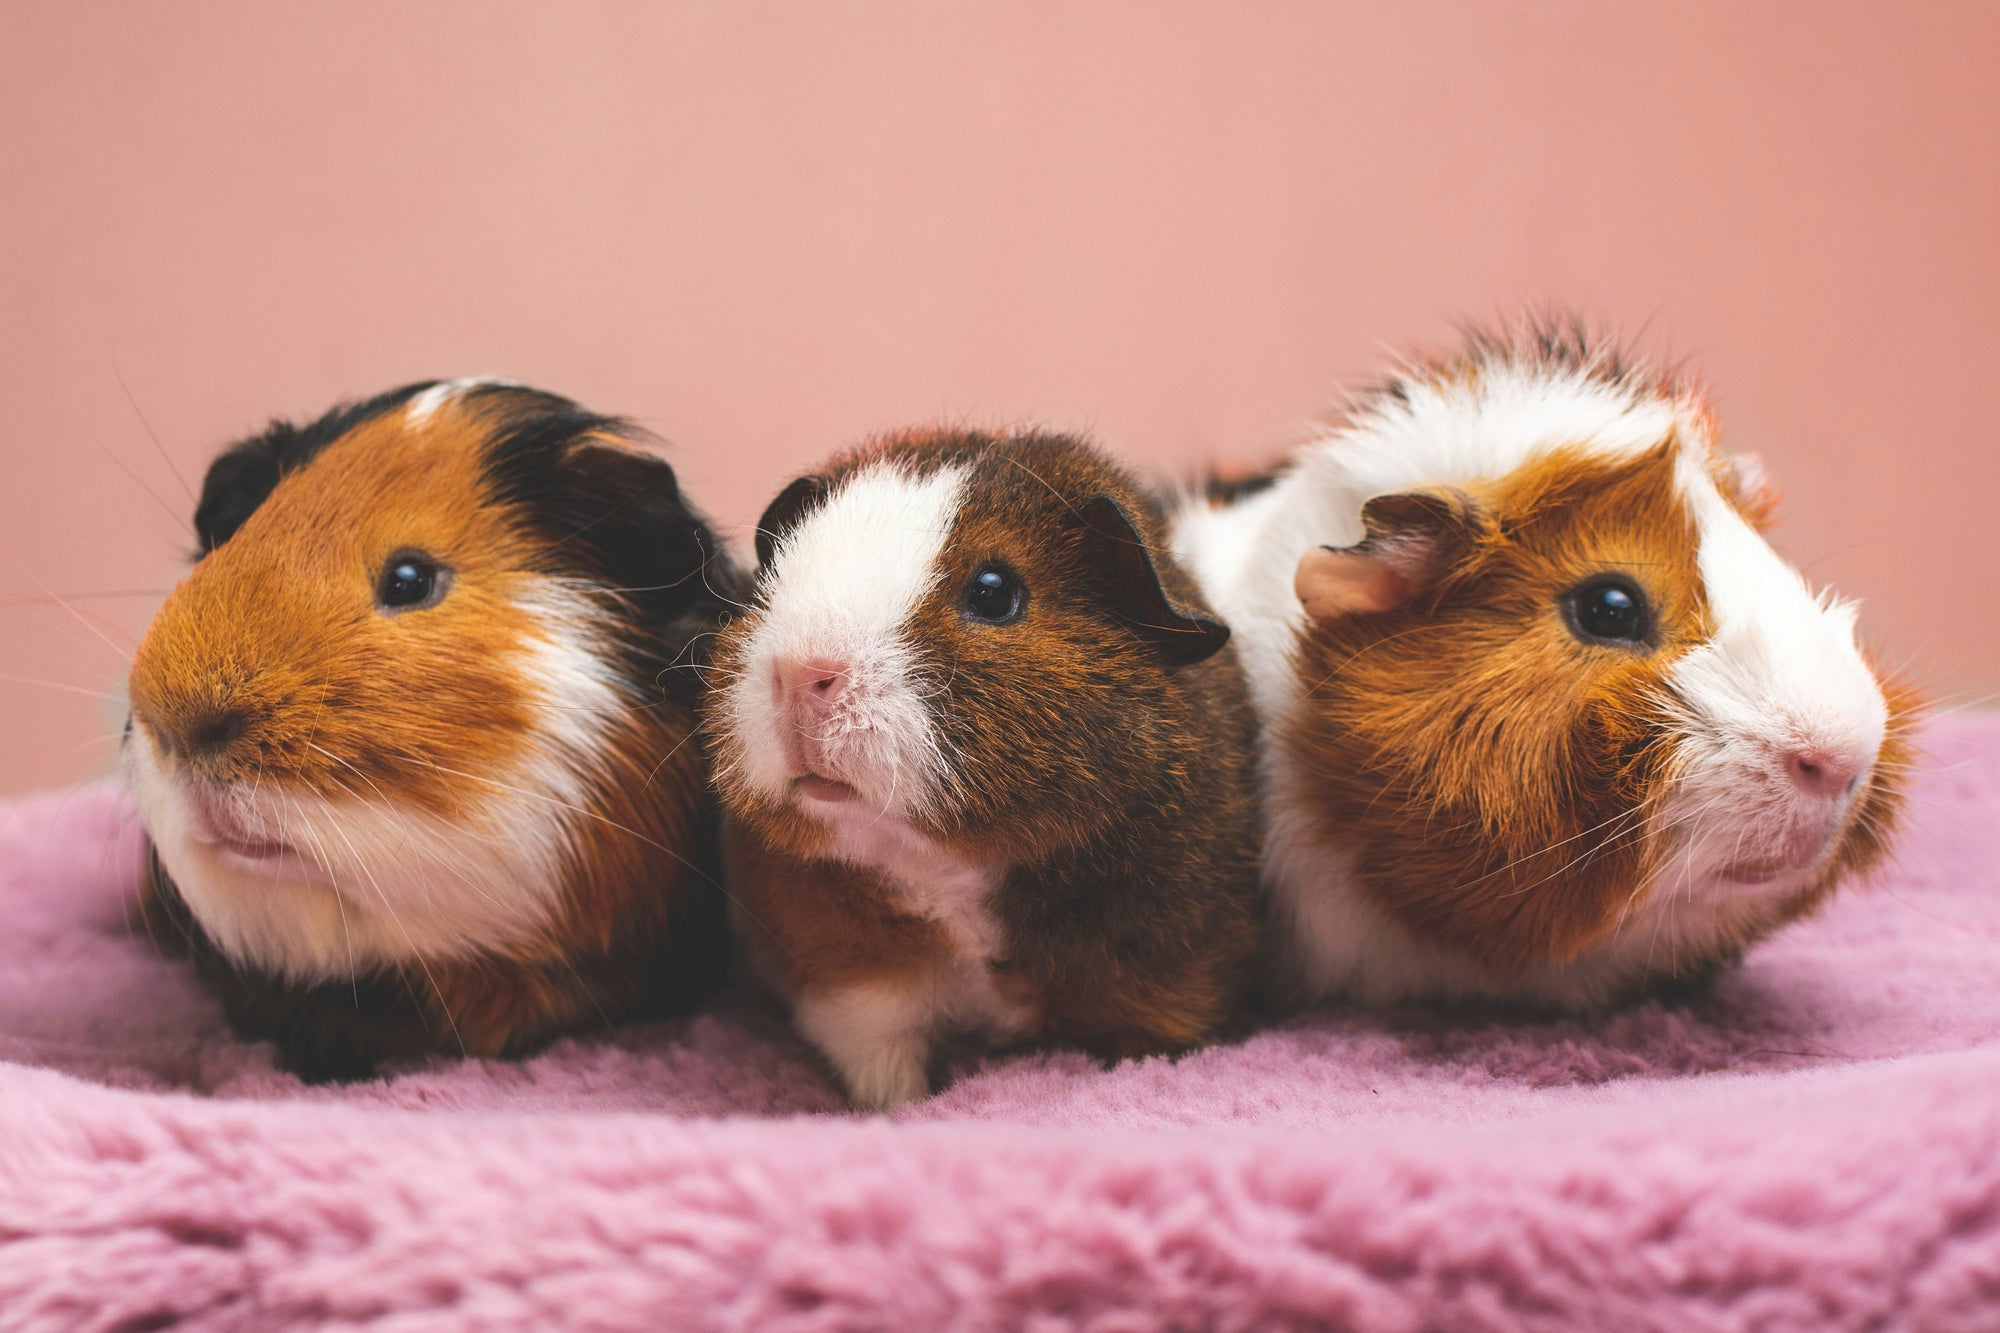 How to Care For Guinea Pigs: Everything You Need to Know